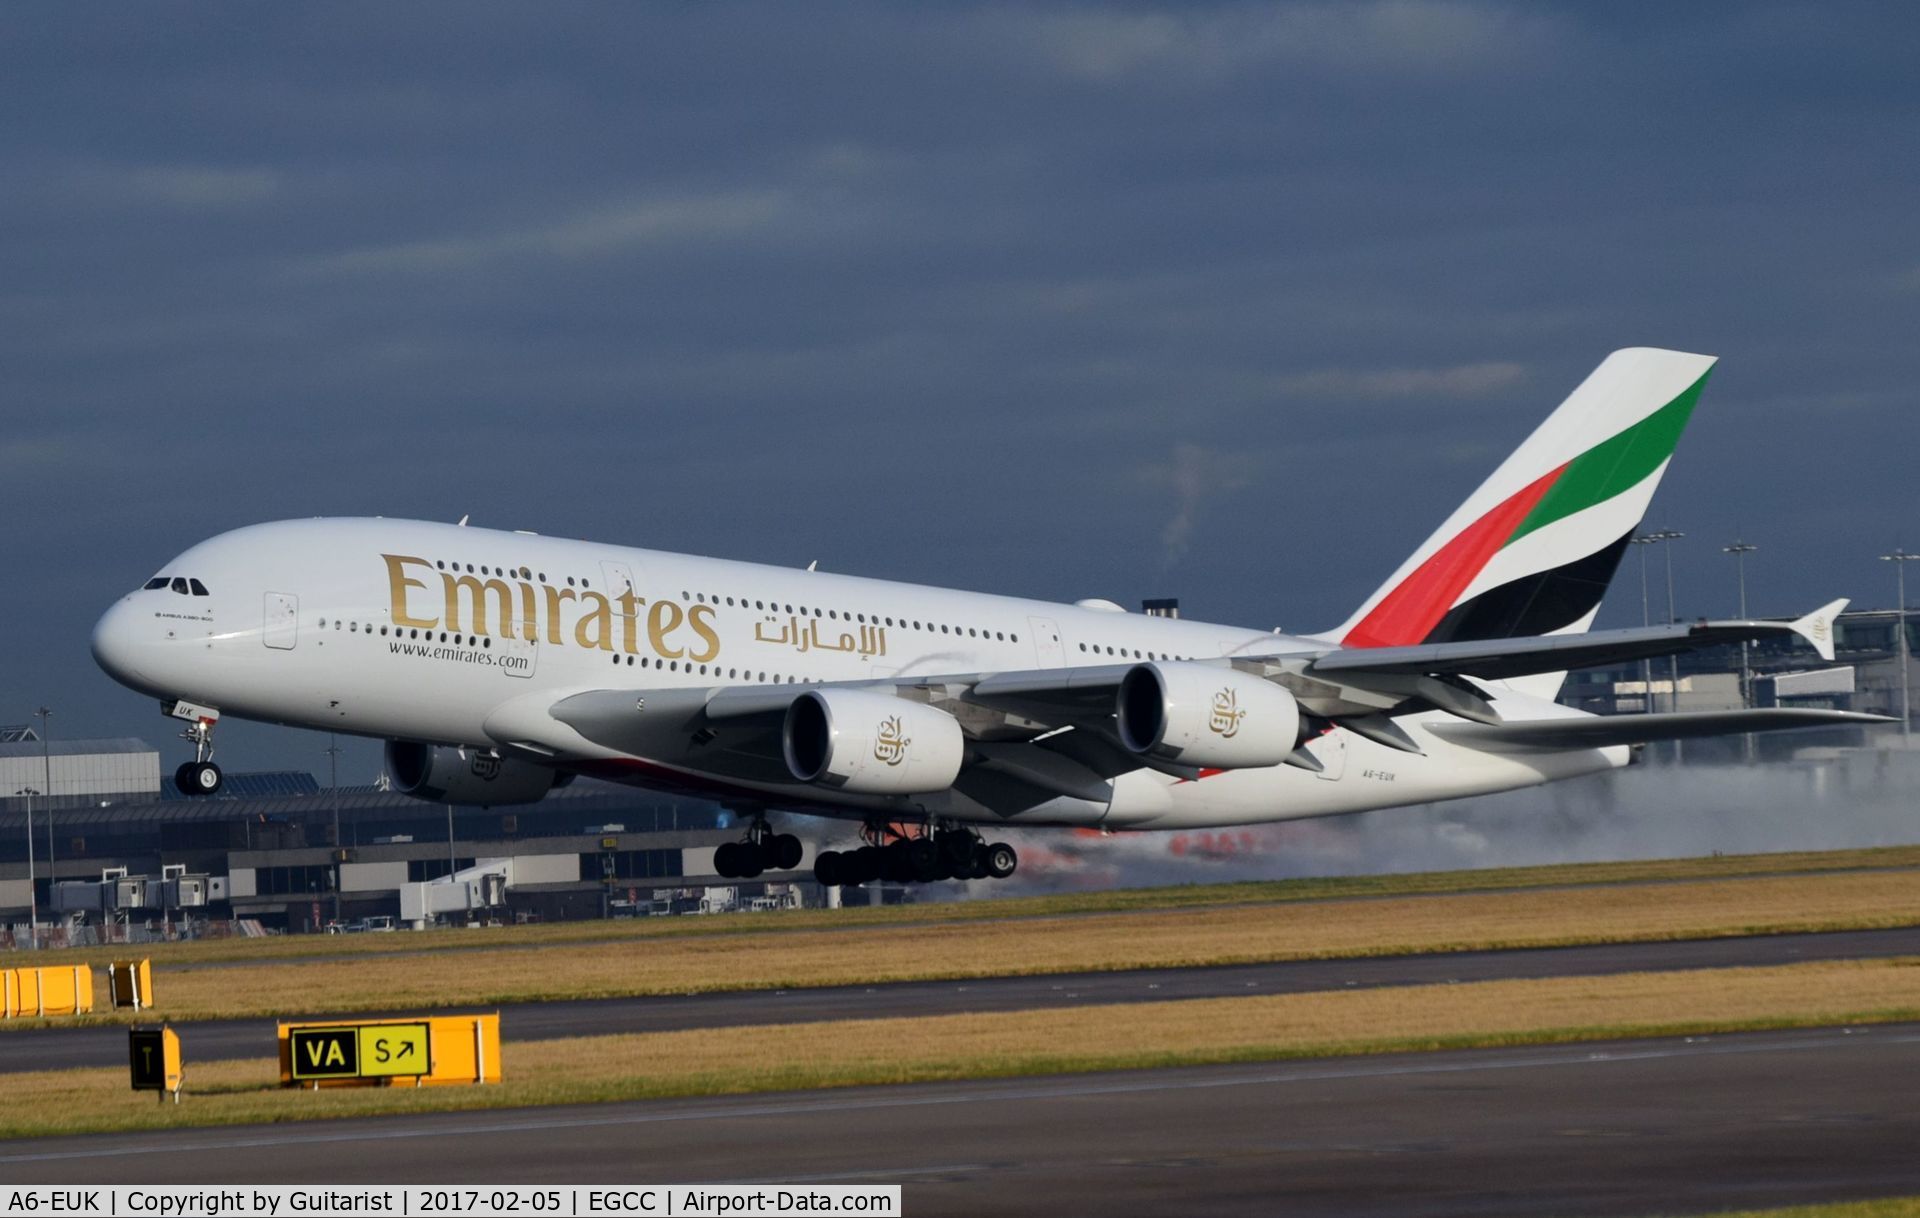 A6-EUK, 2016 Airbus A380-861 C/N 223, At Manchester